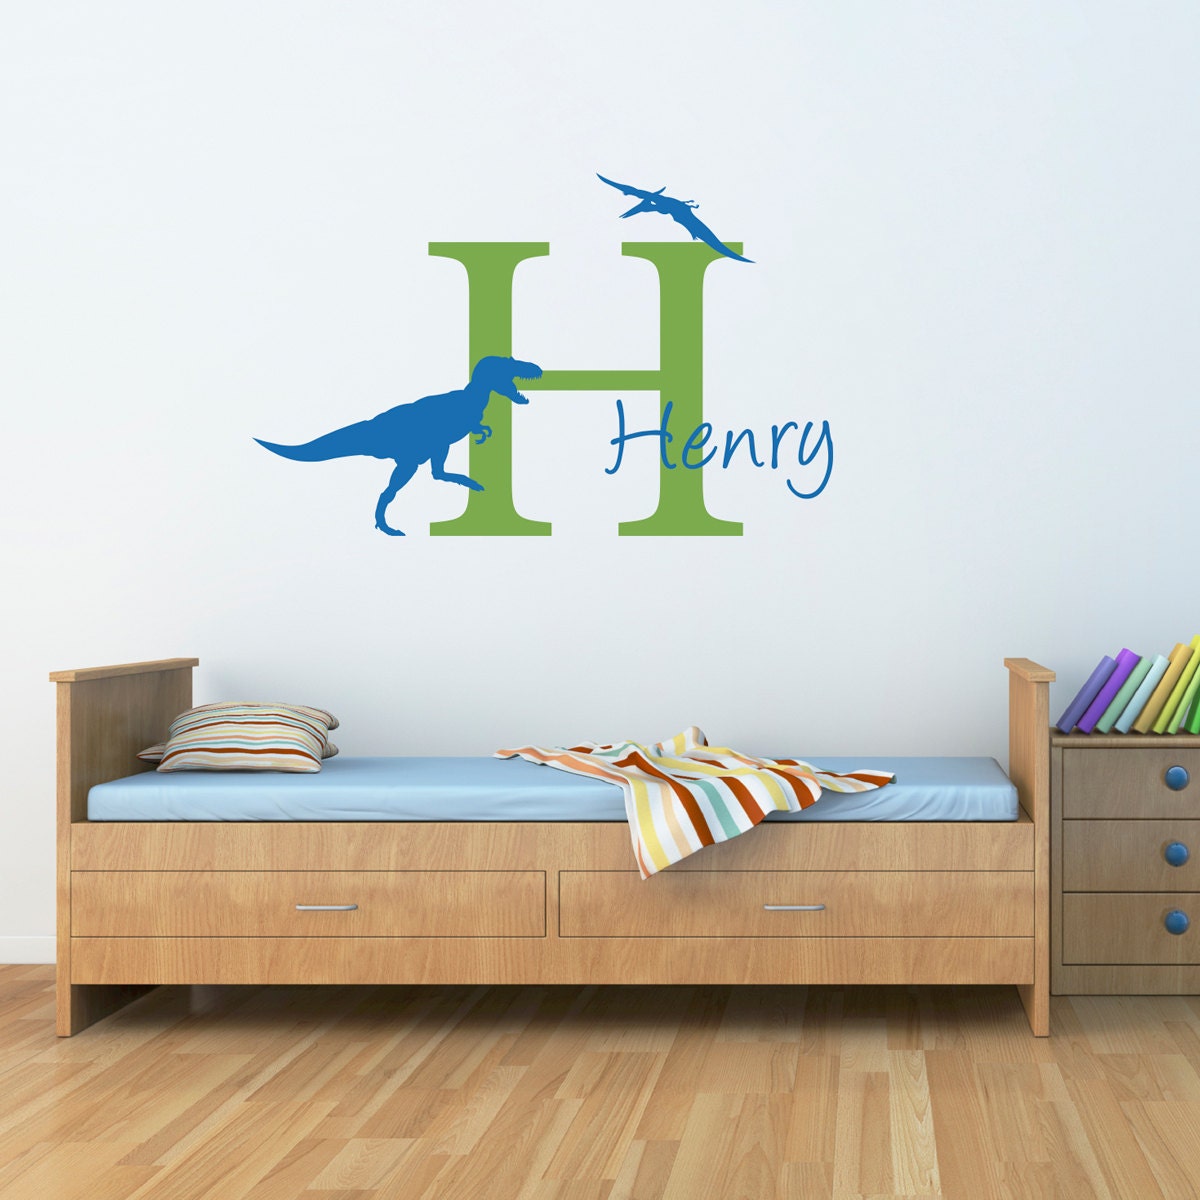 Initial & Name Wall Decal with Dinosaurs - T-Rex and Pterodactyl - Dinosaur Boy Bedroom - Large